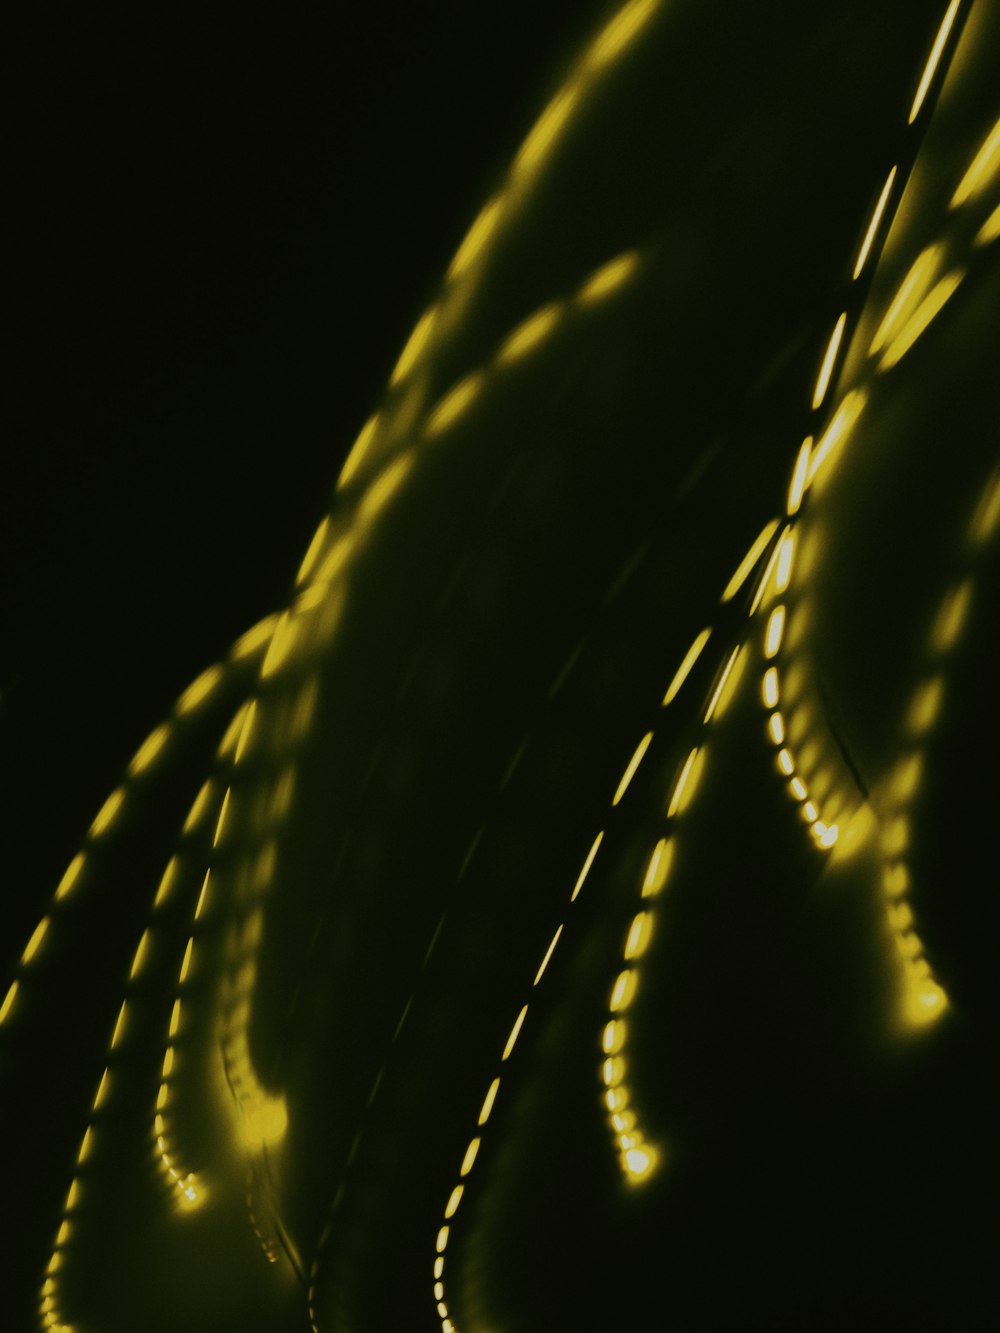 a close up of a car's lights in the dark